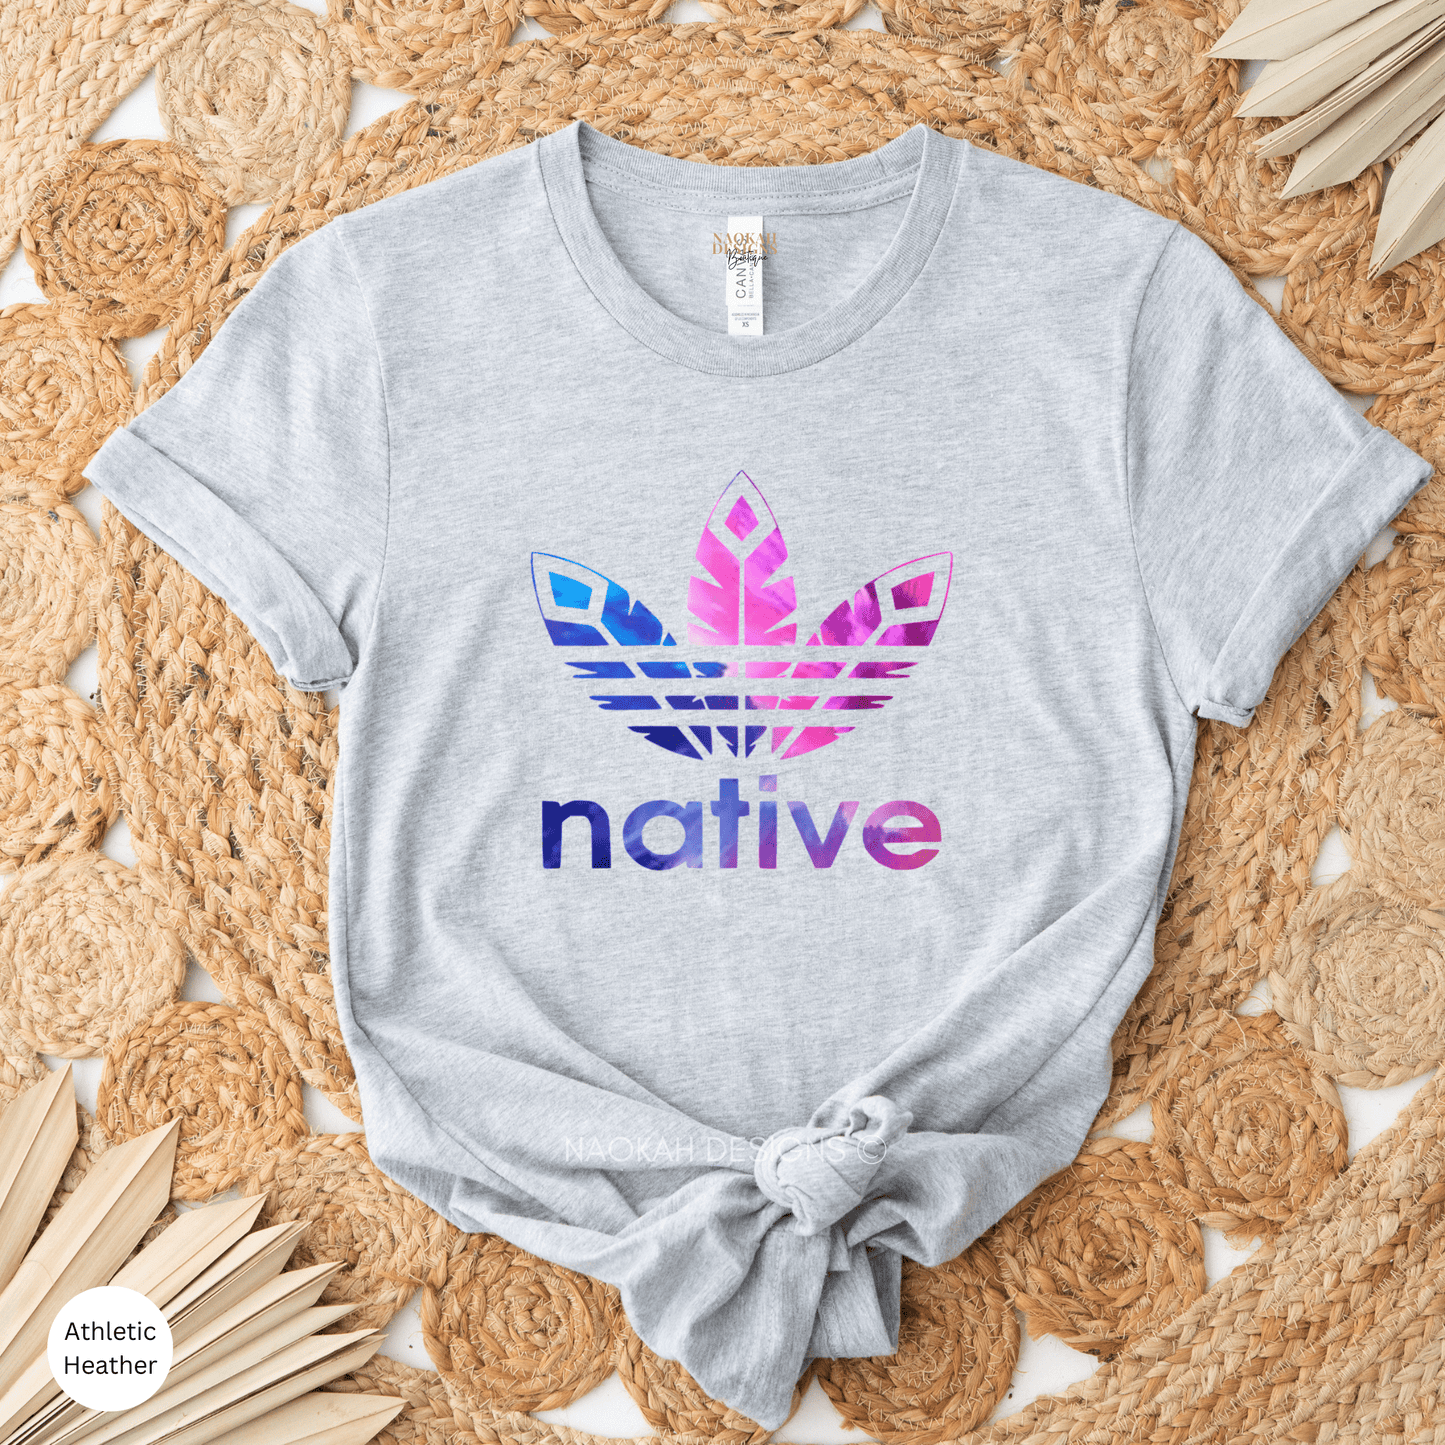 Native Feather Shirt, Indigenous Owned Shop, Native American Shirt, Indigenous Feather Shirt, Indigenous Shirt, Native Sports Shirt, native Adidas shirt